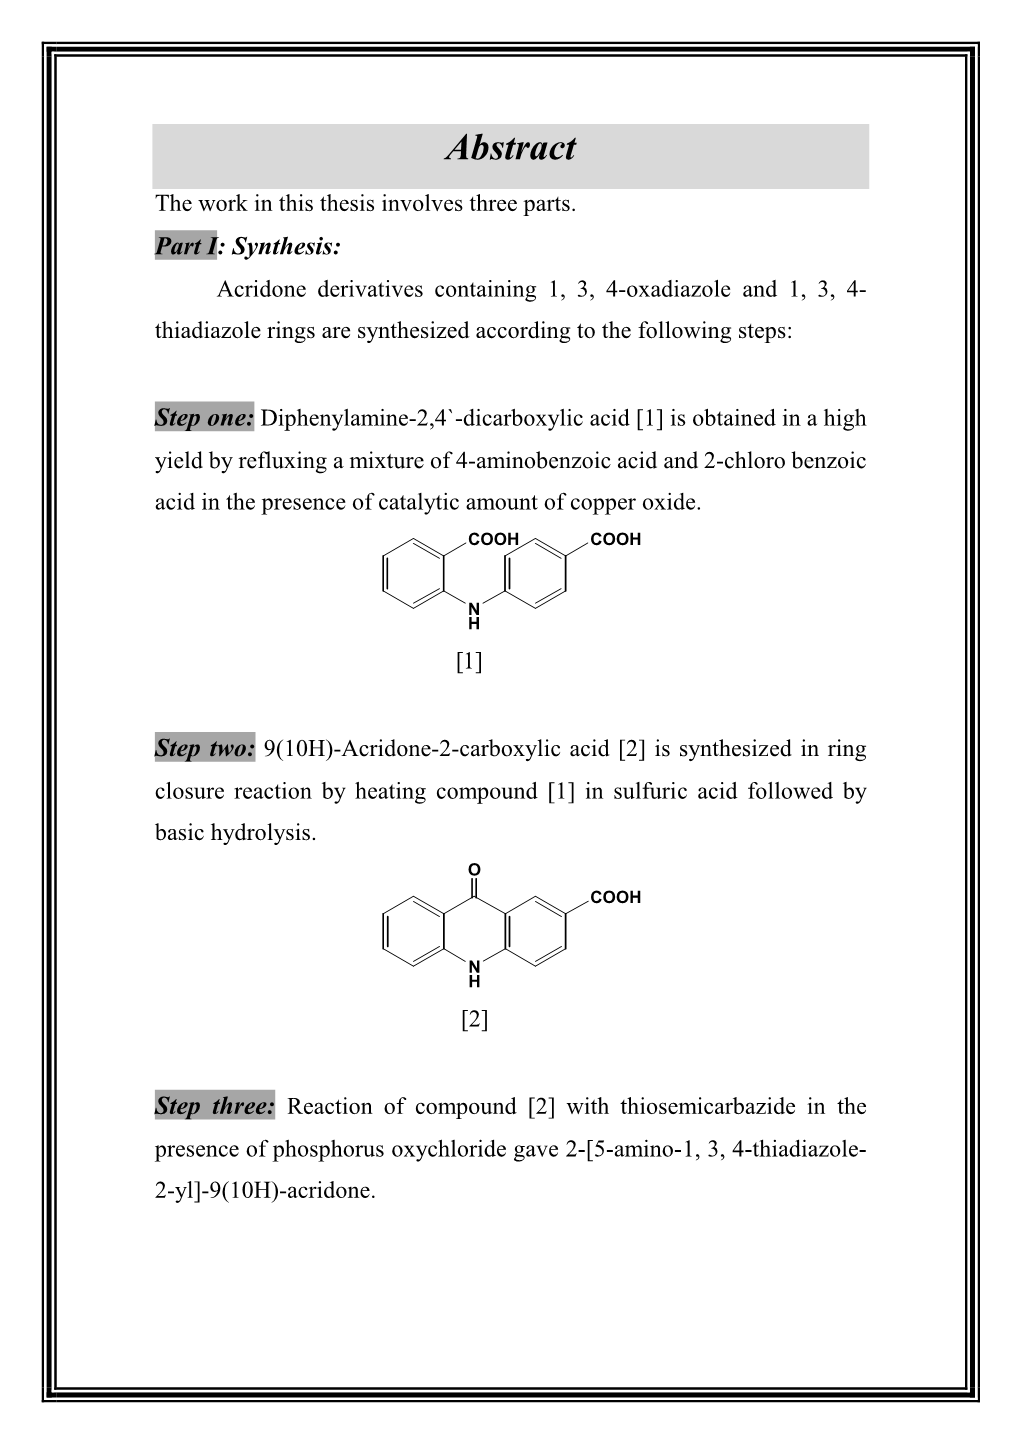 Acridone Derivatives Containing 1, 3, 4-Oxadiazole and 1, 3, 4- Thiadiazole Rings Are Synthesized According to the Following Steps